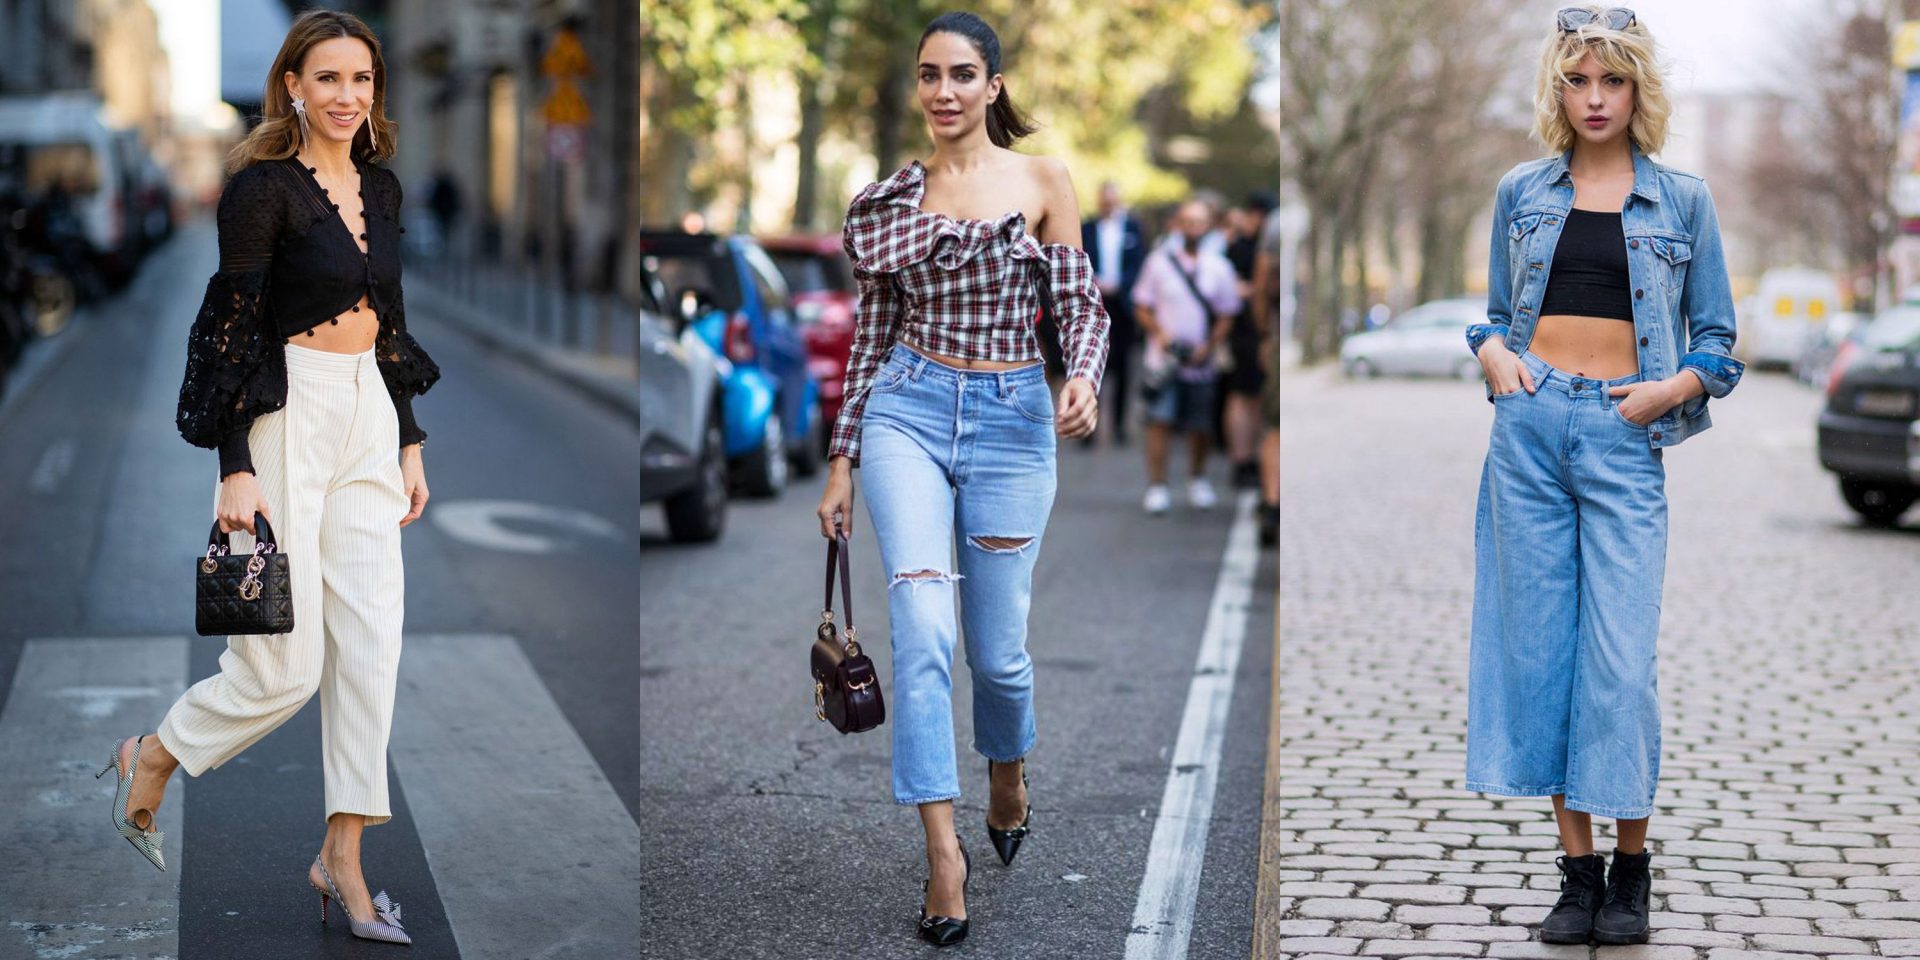 How To Wear Crop Tops Without Showing Stomach: Six Outfit Ideas